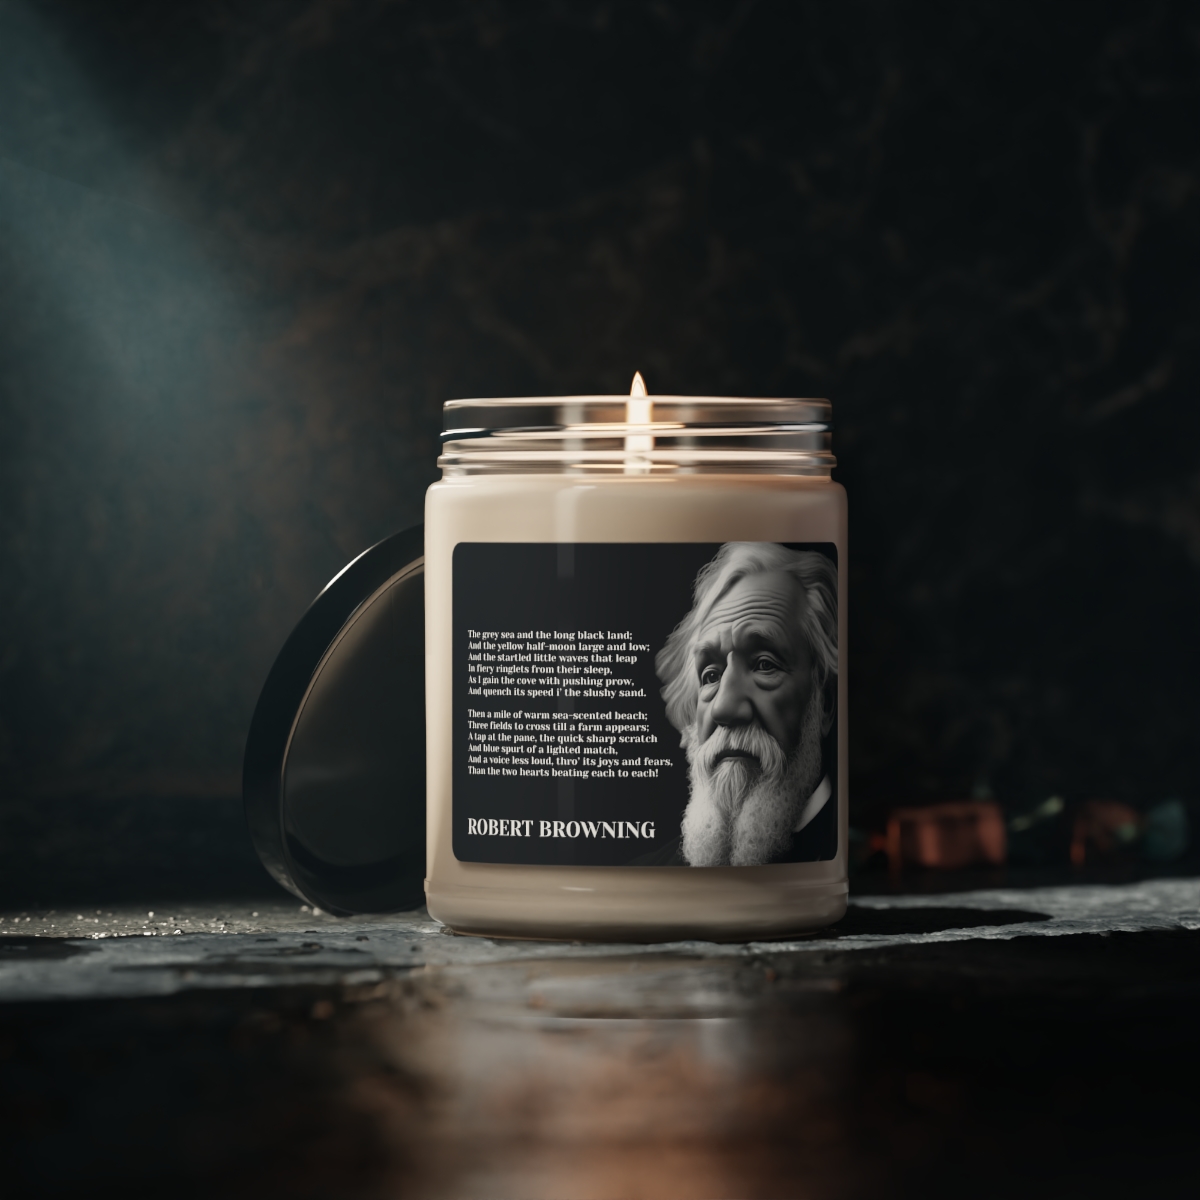 Robert Browning Scented Candle